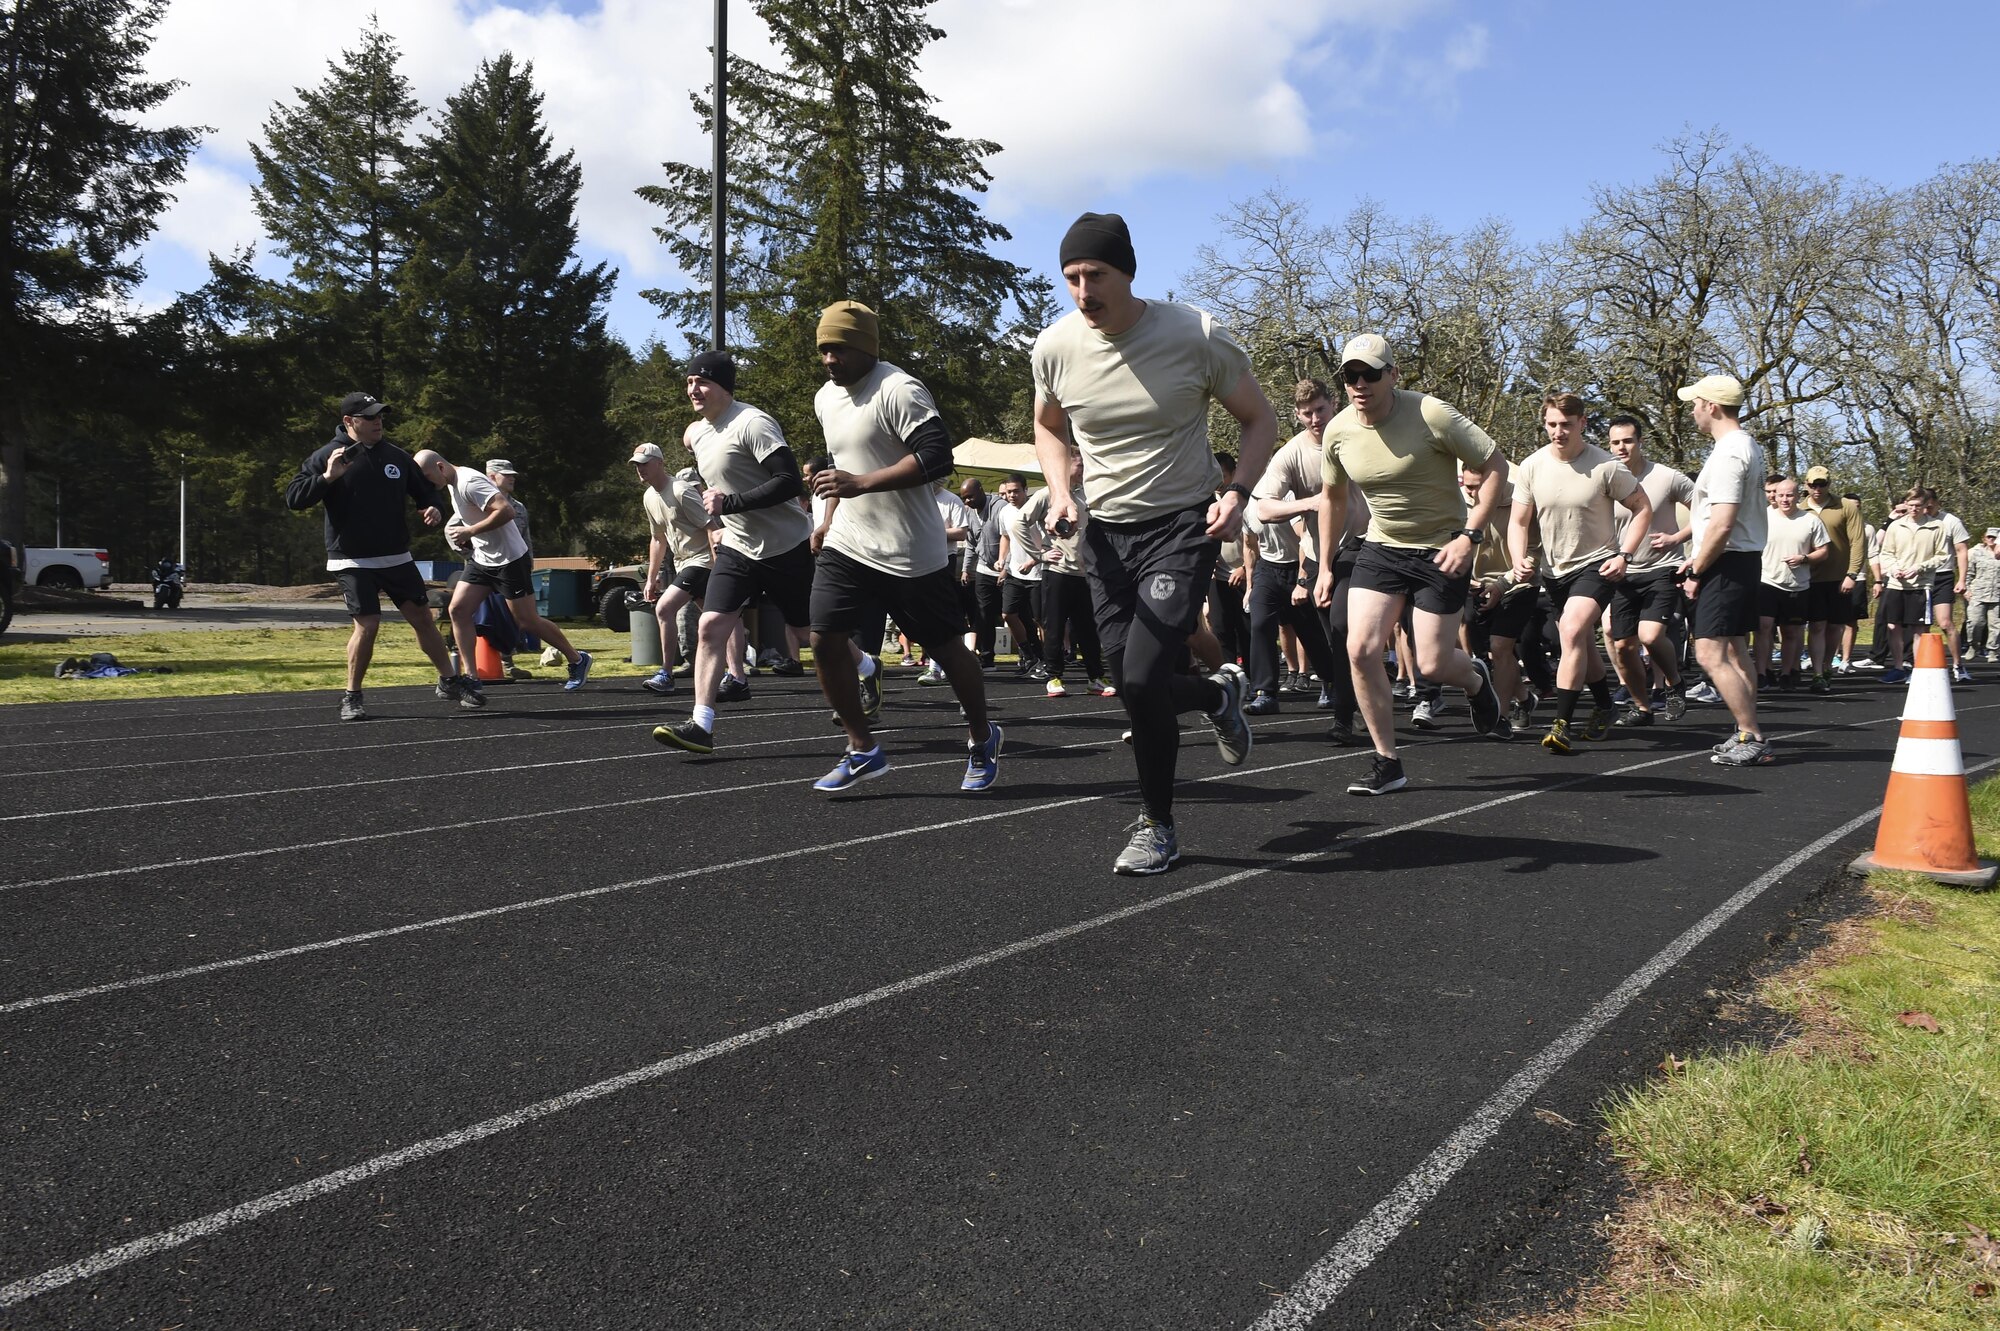 More than 200 members, military and civilians, of the 1st Air Support Operations Group, 194th ASOG, 62nd Airlift Wing and Joint Base Lewis- McChord, Wash., run and walk on the McChord Field outdoor track, March 30, 2017, to honor TACP Airmen who have died in combat or training and to raise money and awareness for the Tactical Air Control Party Association. To date, the TACP-A has given more than $200K back to the community and their families. (Air Force Photo/ Staff Sgt. Naomi Shipley)